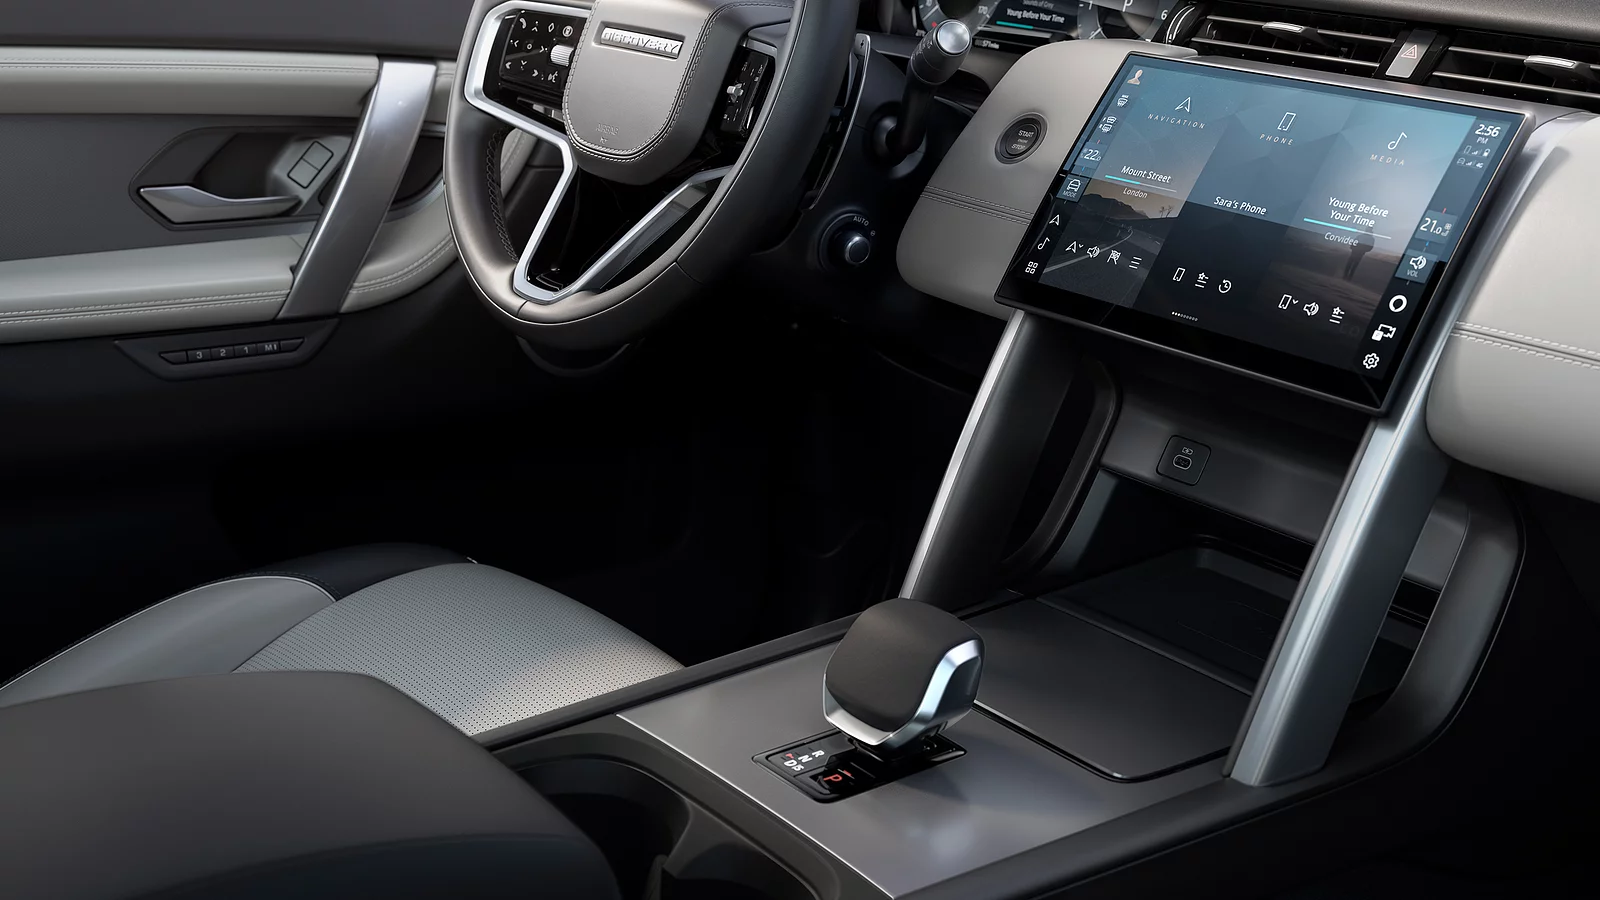 Discovery Sport interior dashboard and infotainment system